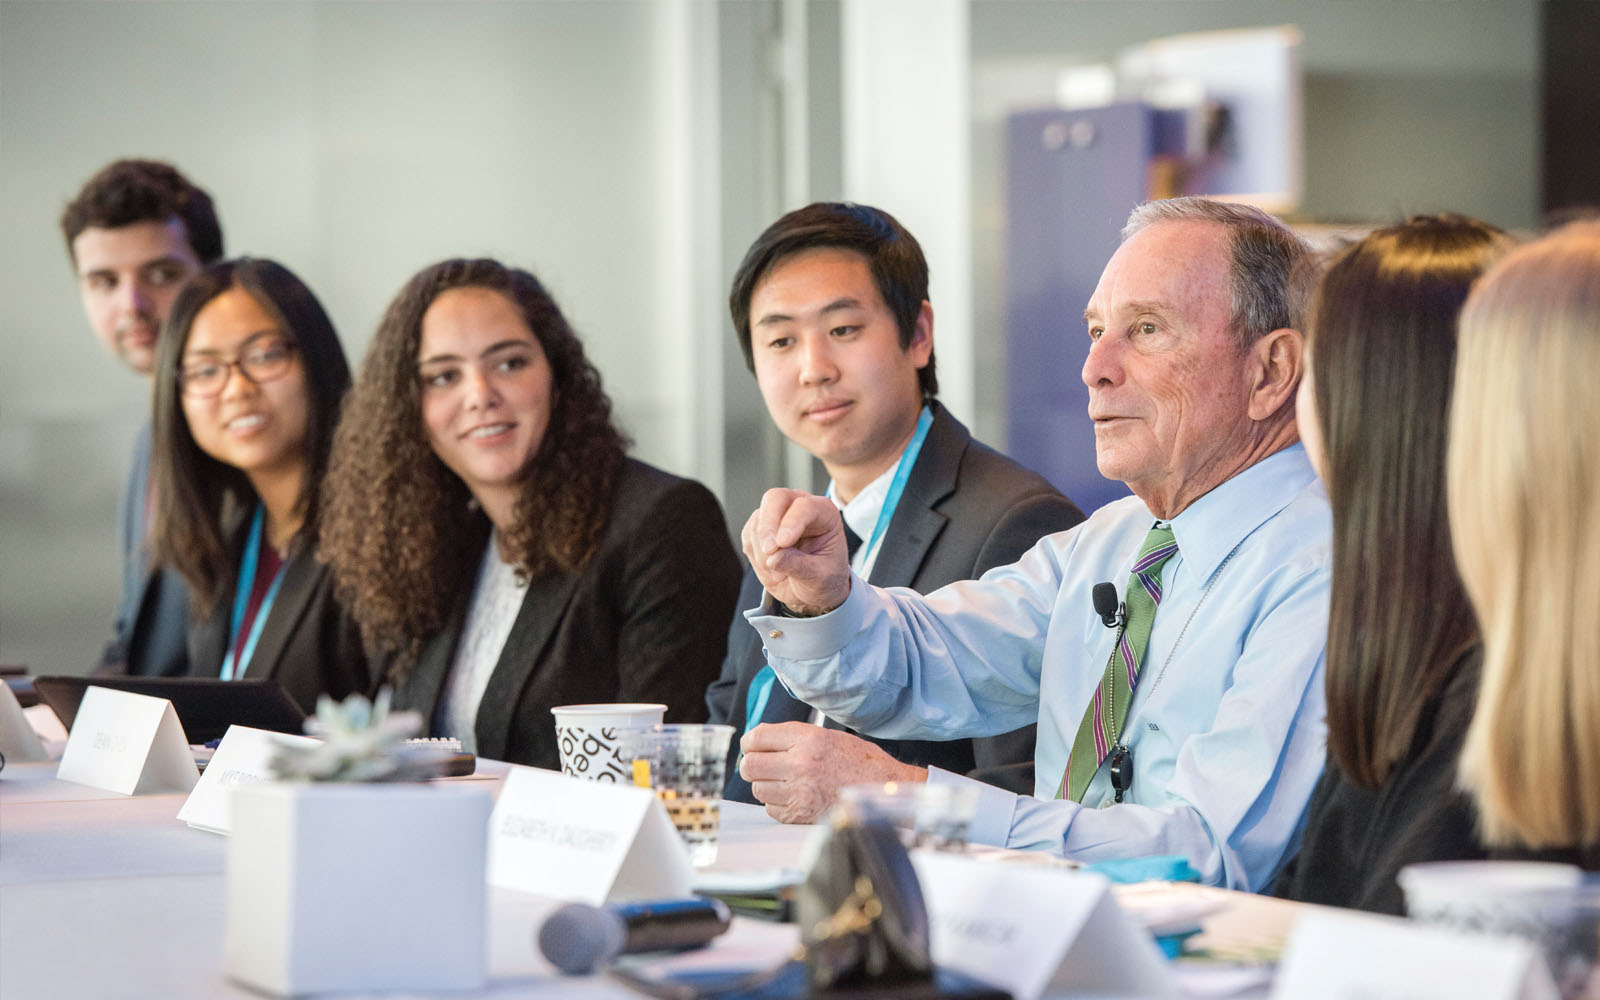 Mike Bloomberg hosts Johns Hopkins Bloomberg Scholars at the Bloomberg L.P. headquarters in New York City.